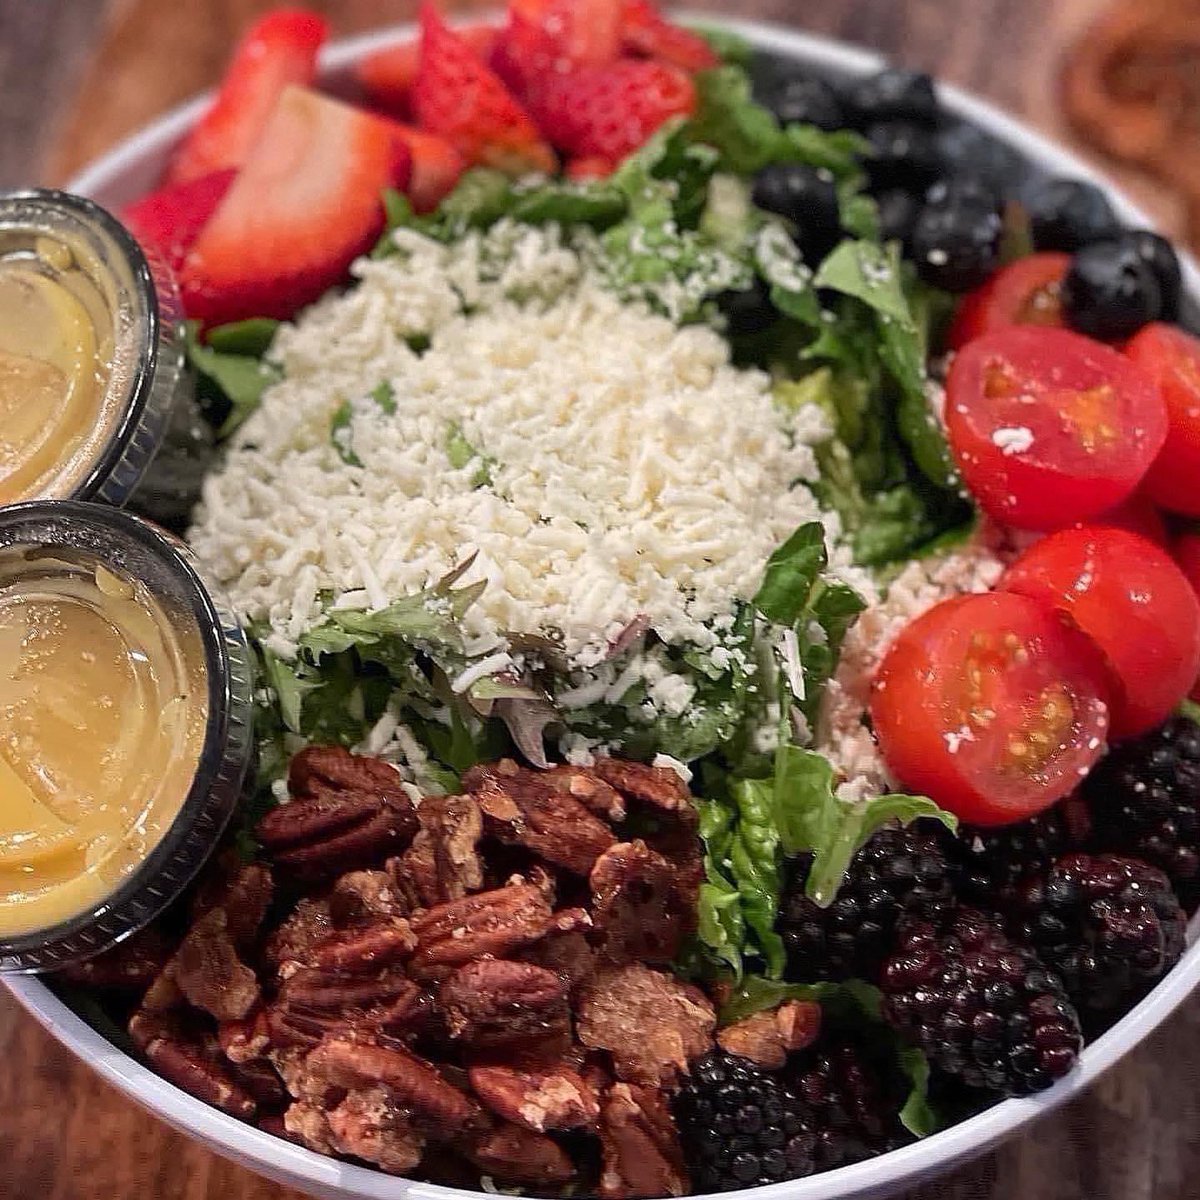 Add our Berry Good Salad to your Wednesday lunch or dinner plans!! 👉 Seasonal berries, tomatoes, spiced pecans, feta and our citrus vinaigrette. -DELICIOUS!!! #urbancookhouse #eatfresh #BuyLocalEatUrban #UC #salads